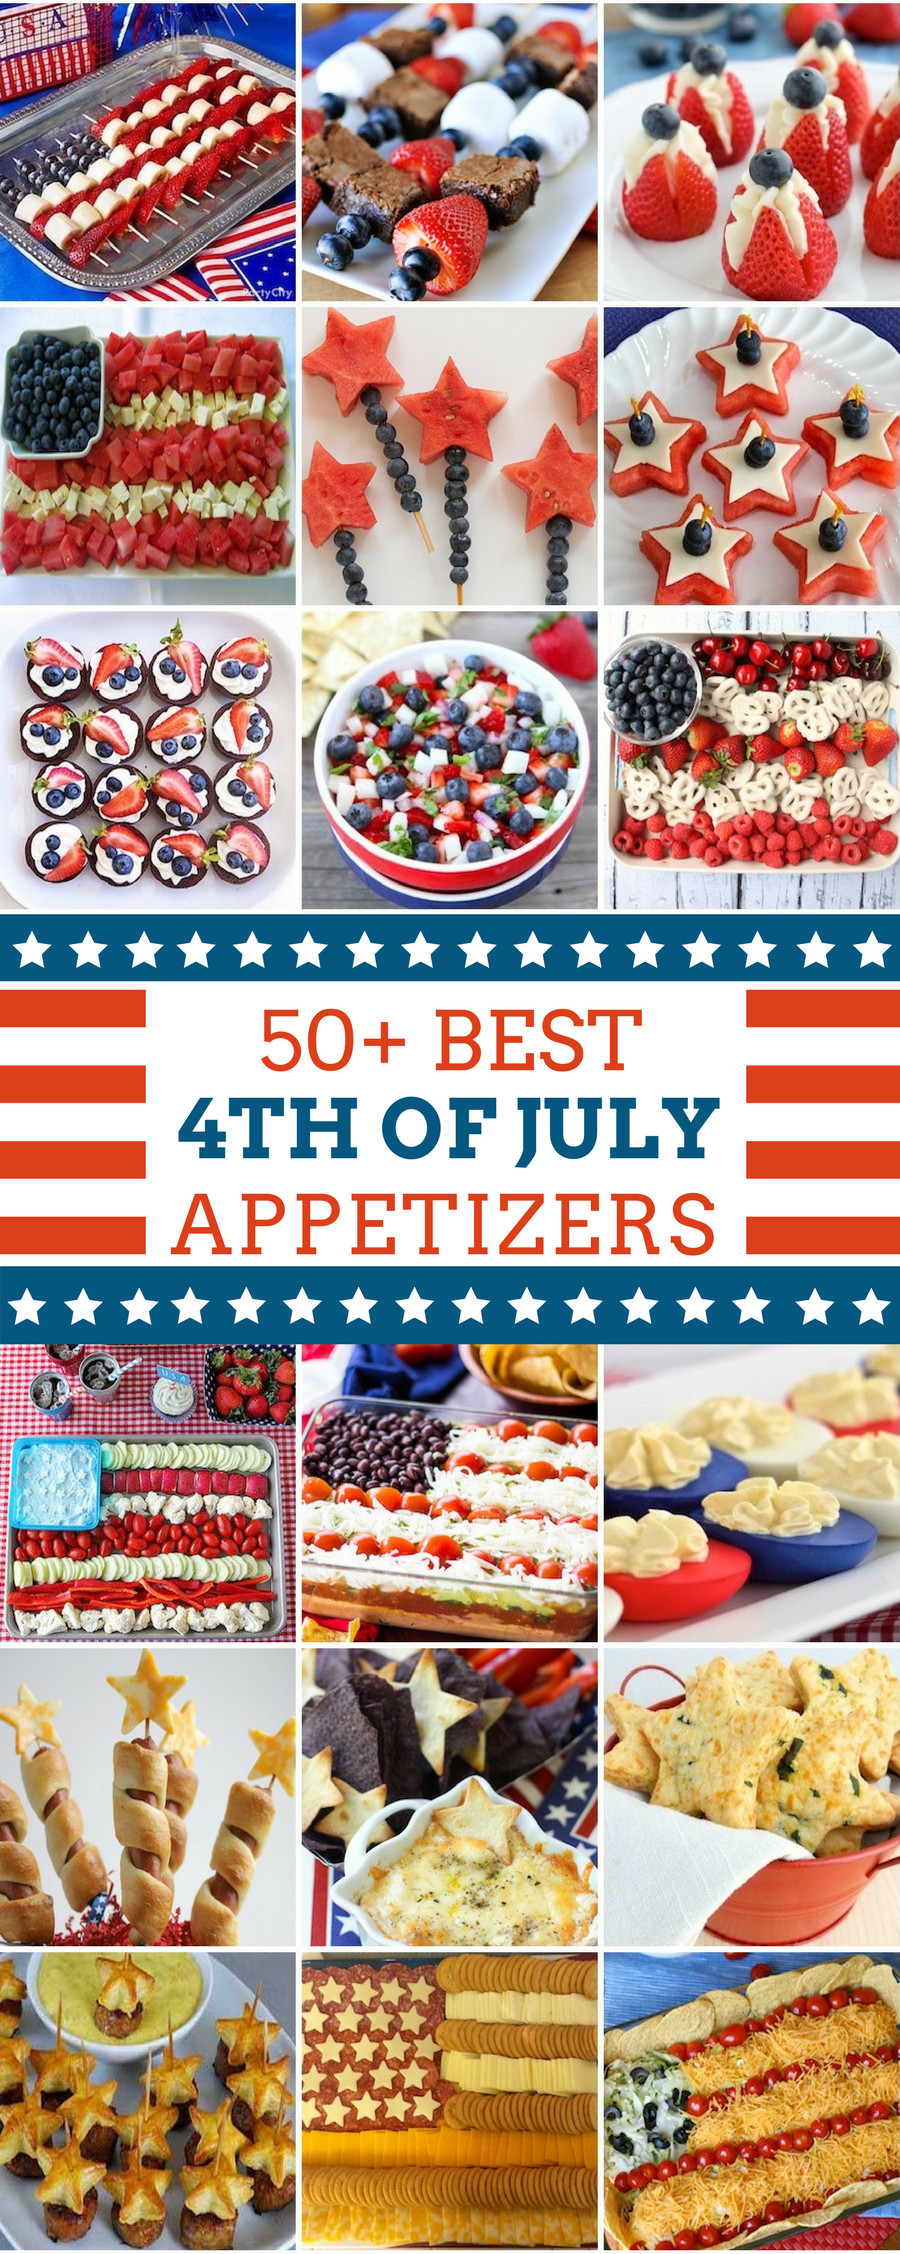 Best 4th Of July Food
 50 Best 4th of July Appetizers Prudent Penny Pincher